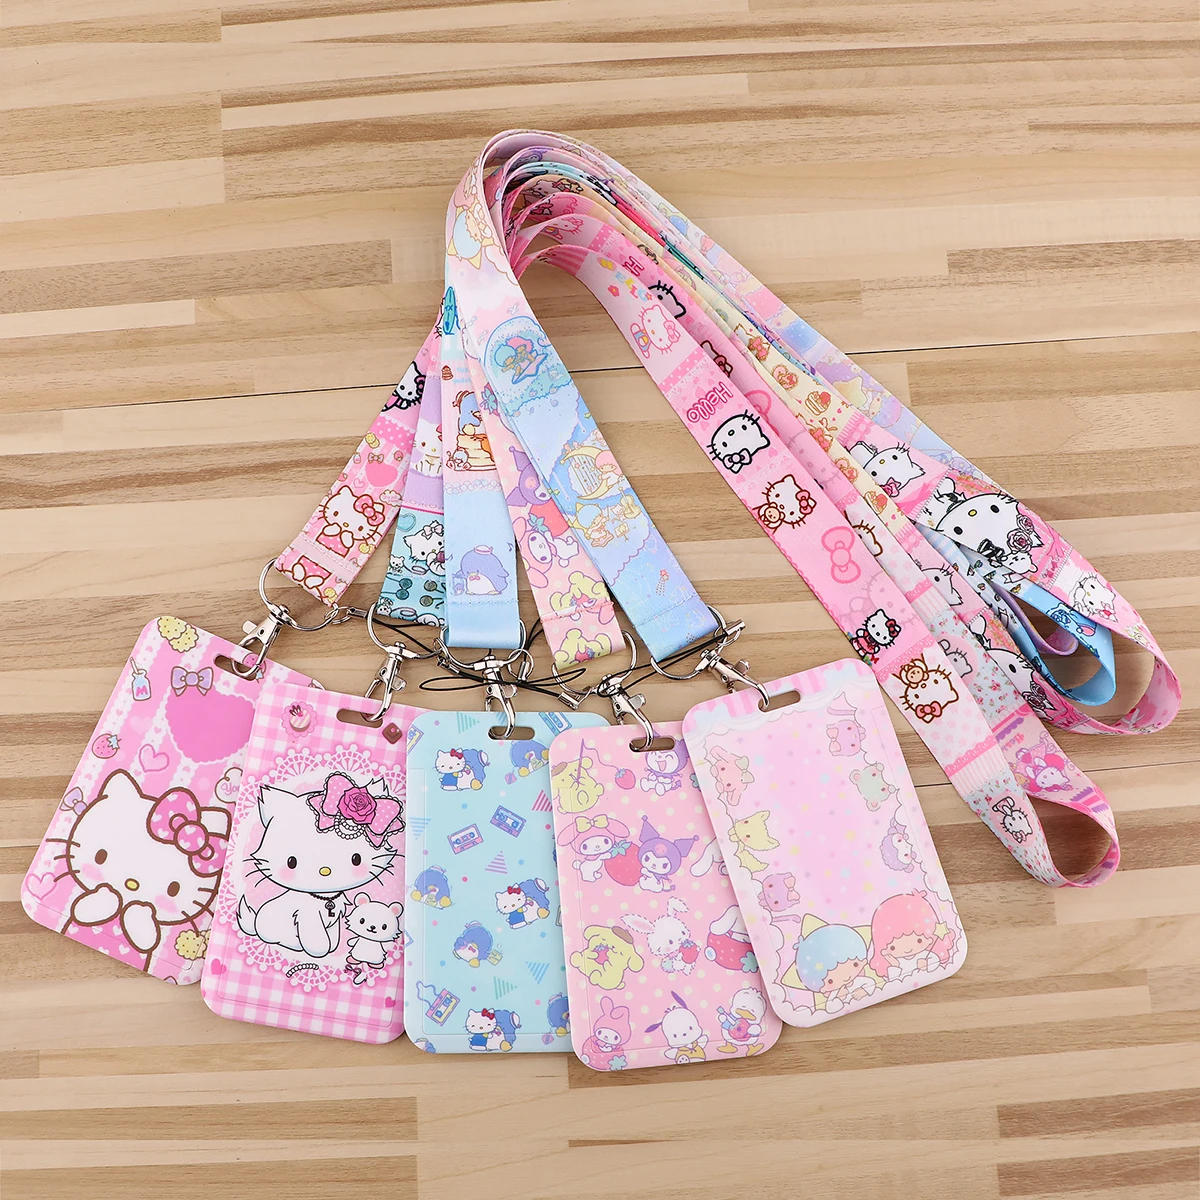 flyingbee anime keychain tags strap neck lanyards for keys id card pass gym mobile phone usb badge holder diy hang rope x1365 Rabbit Keychain Kawaii Cat Cartoon Anime Lanyards for Key ID Card Gym Cell Phone Strap USB Badge Holder Accessories Gift